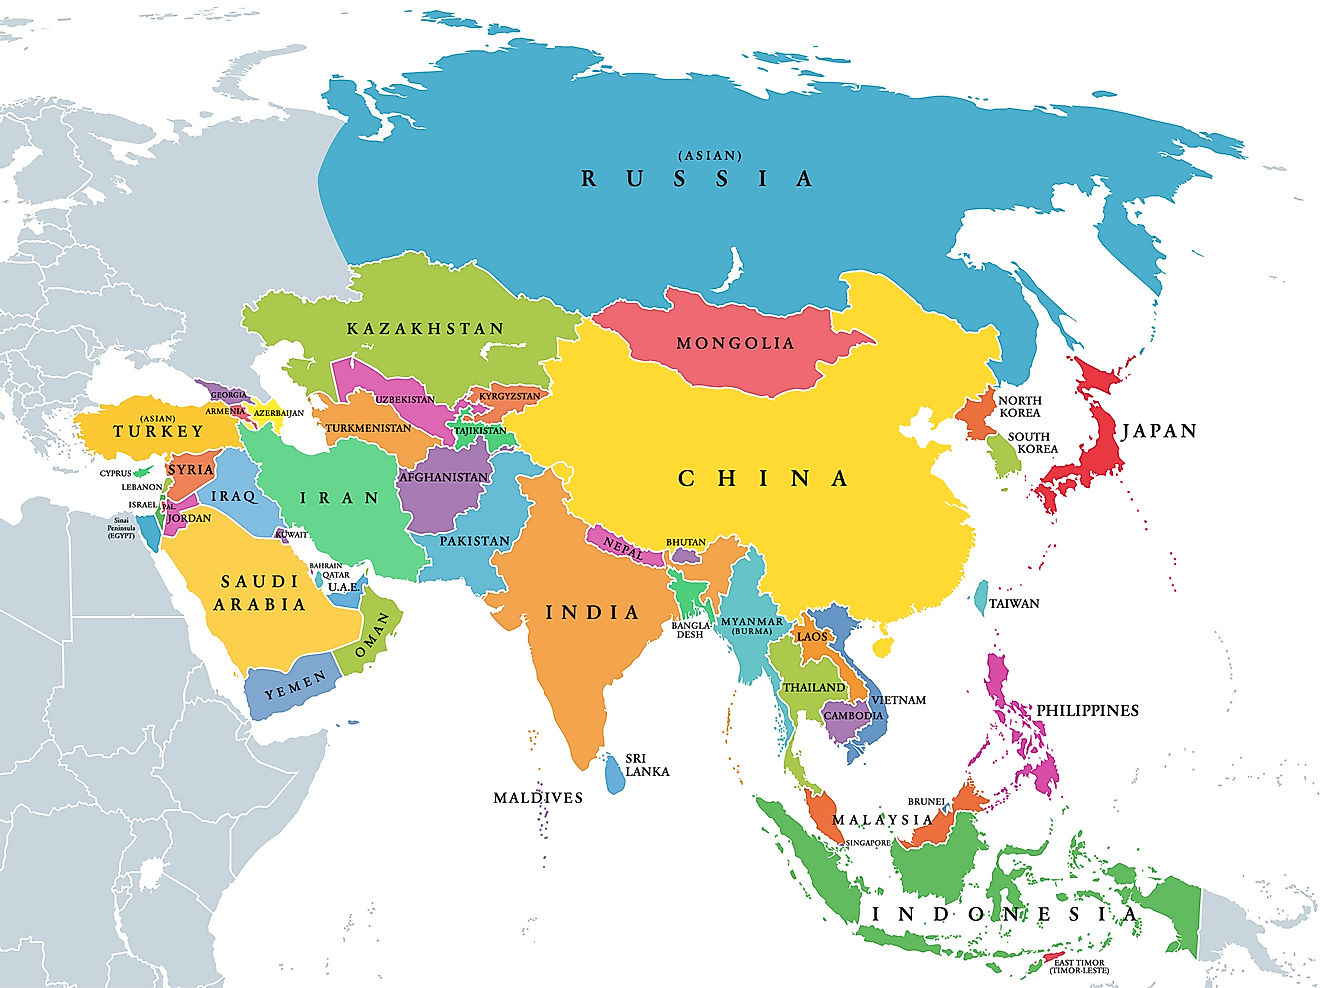 Name a country in asia